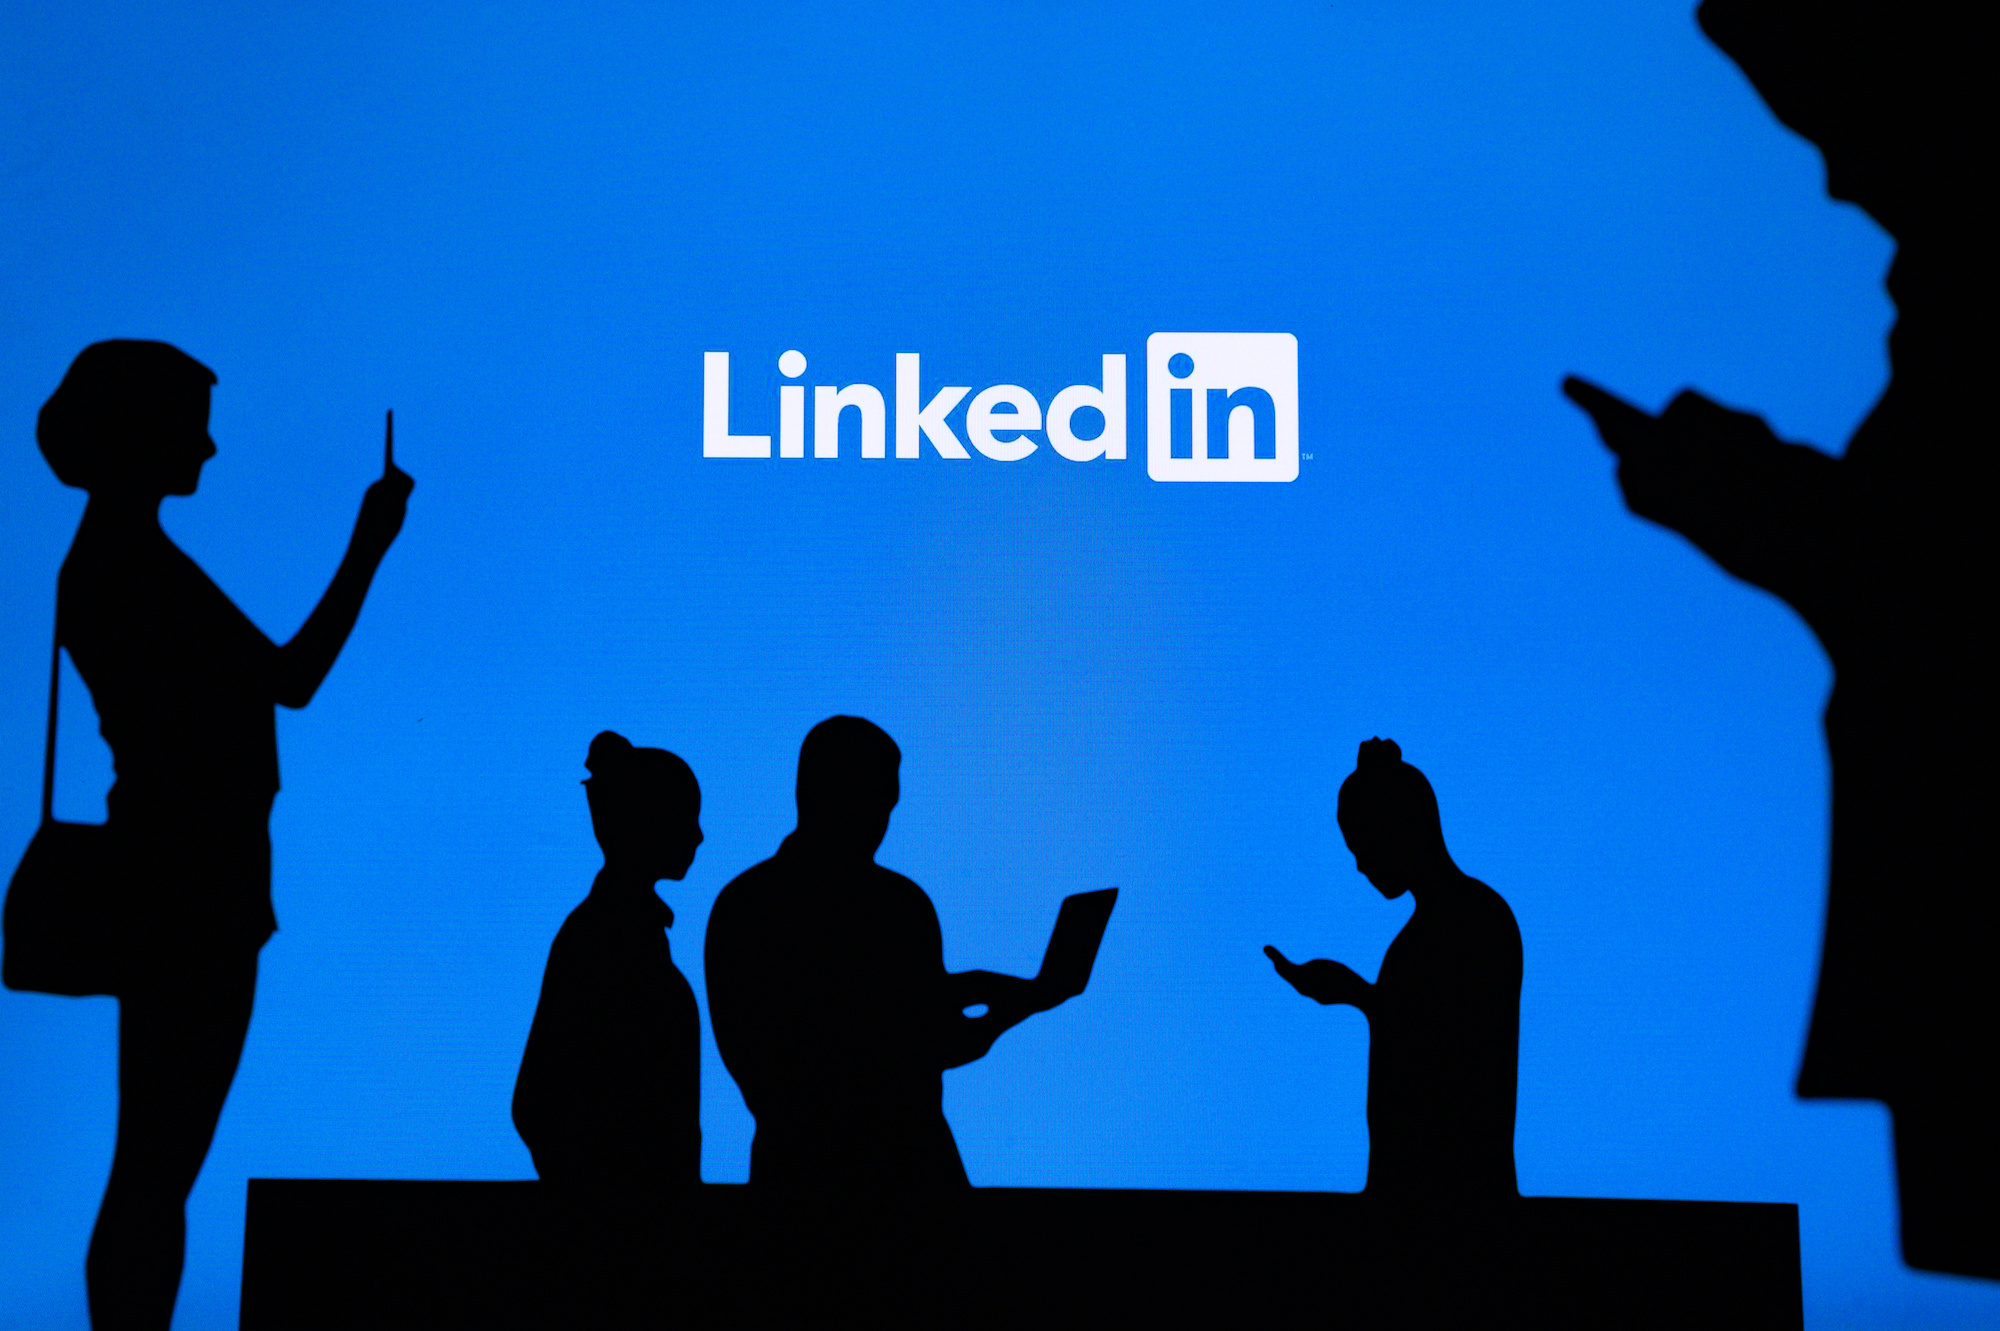 How to Post a GIF on LinkedIn